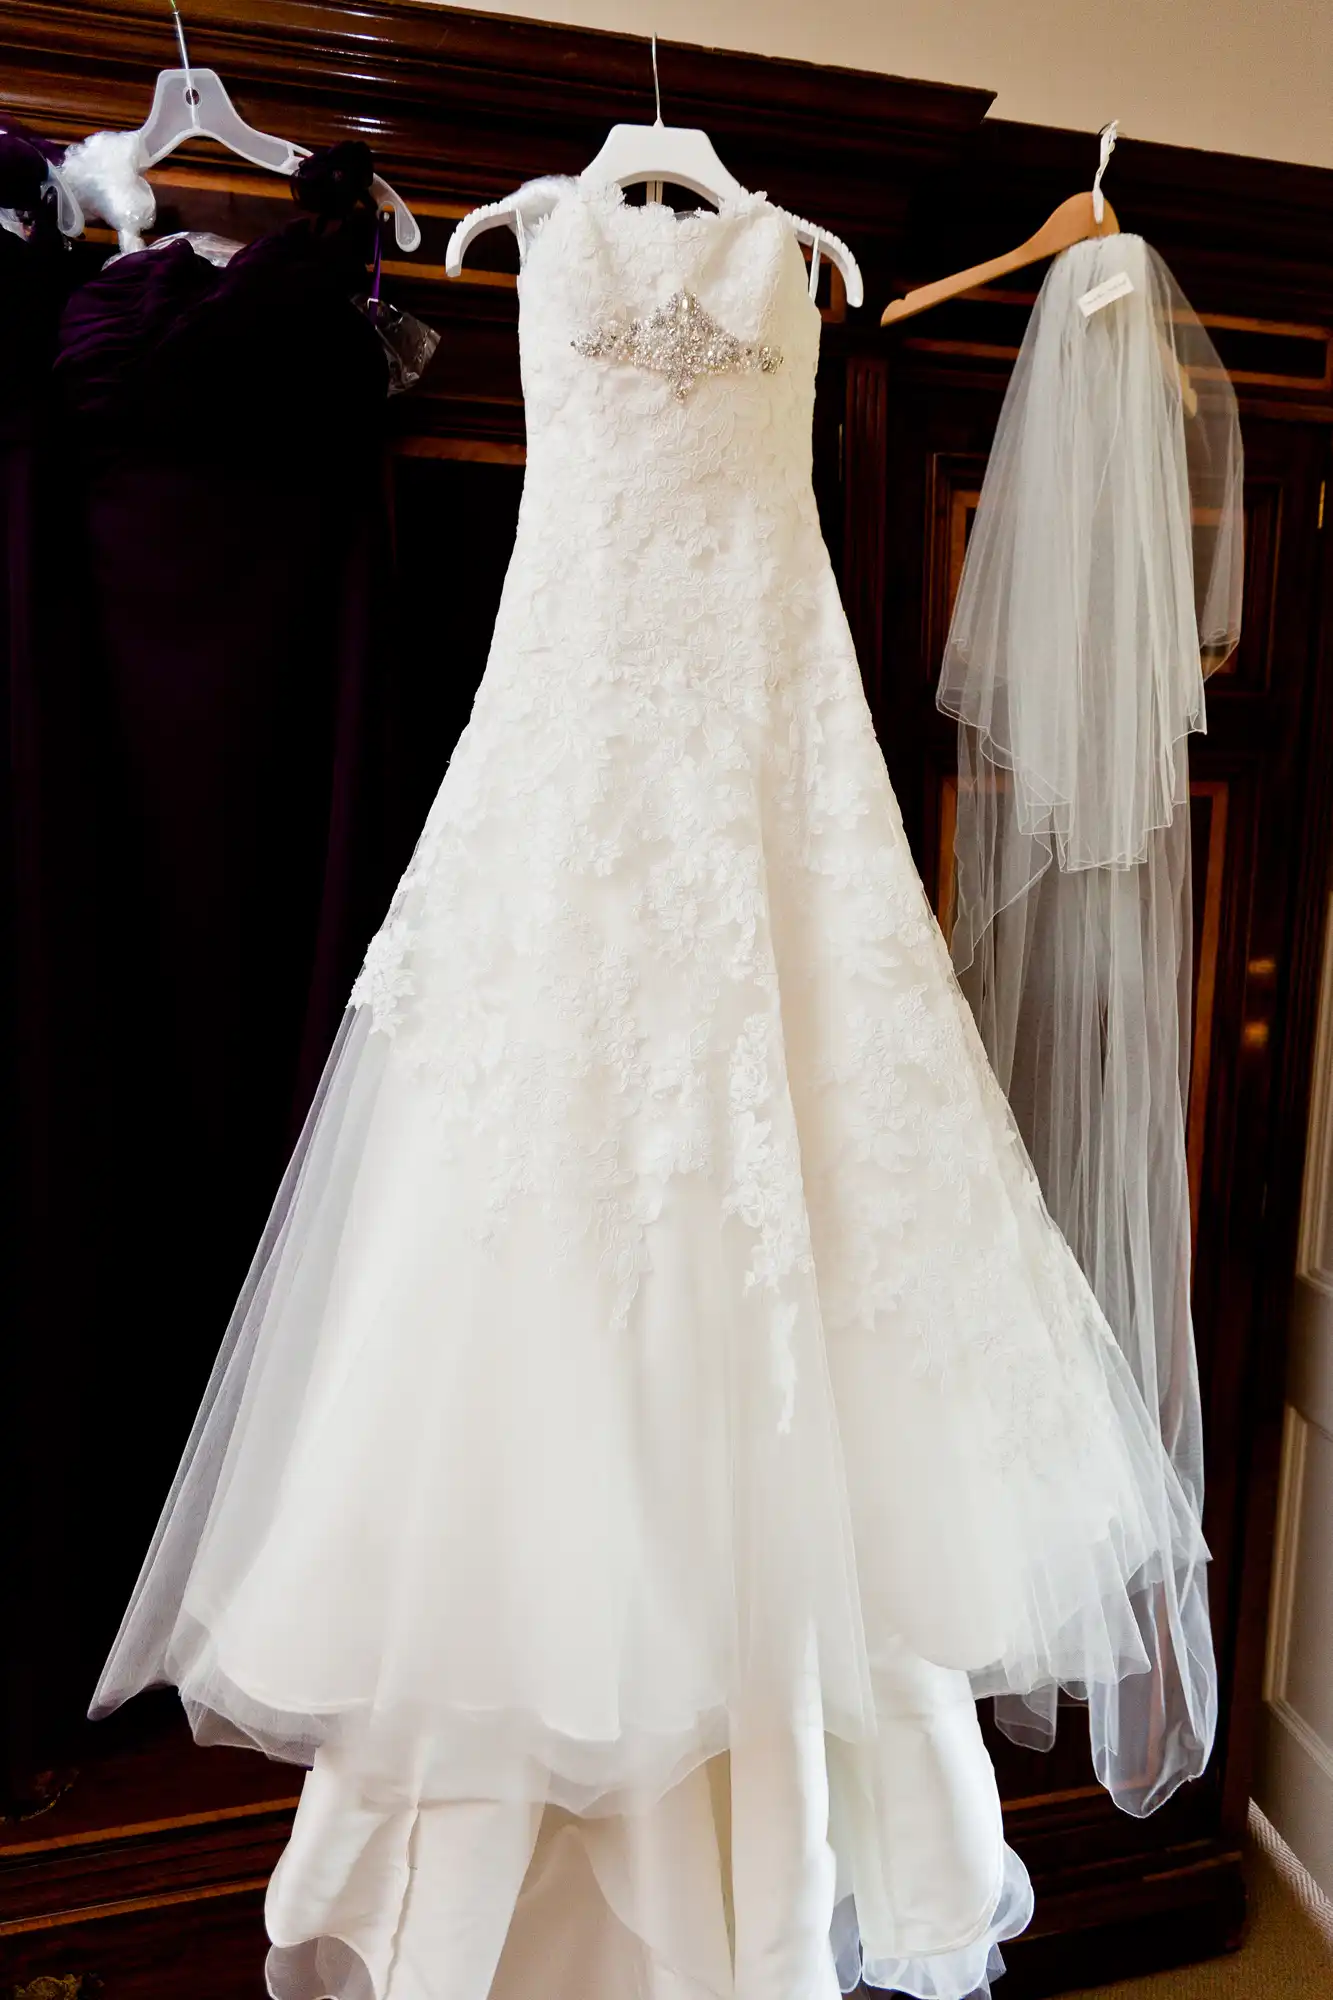 A white wedding dress with lace details and a beaded bodice hangs alongside a veil on wooden hangers against a dark background.